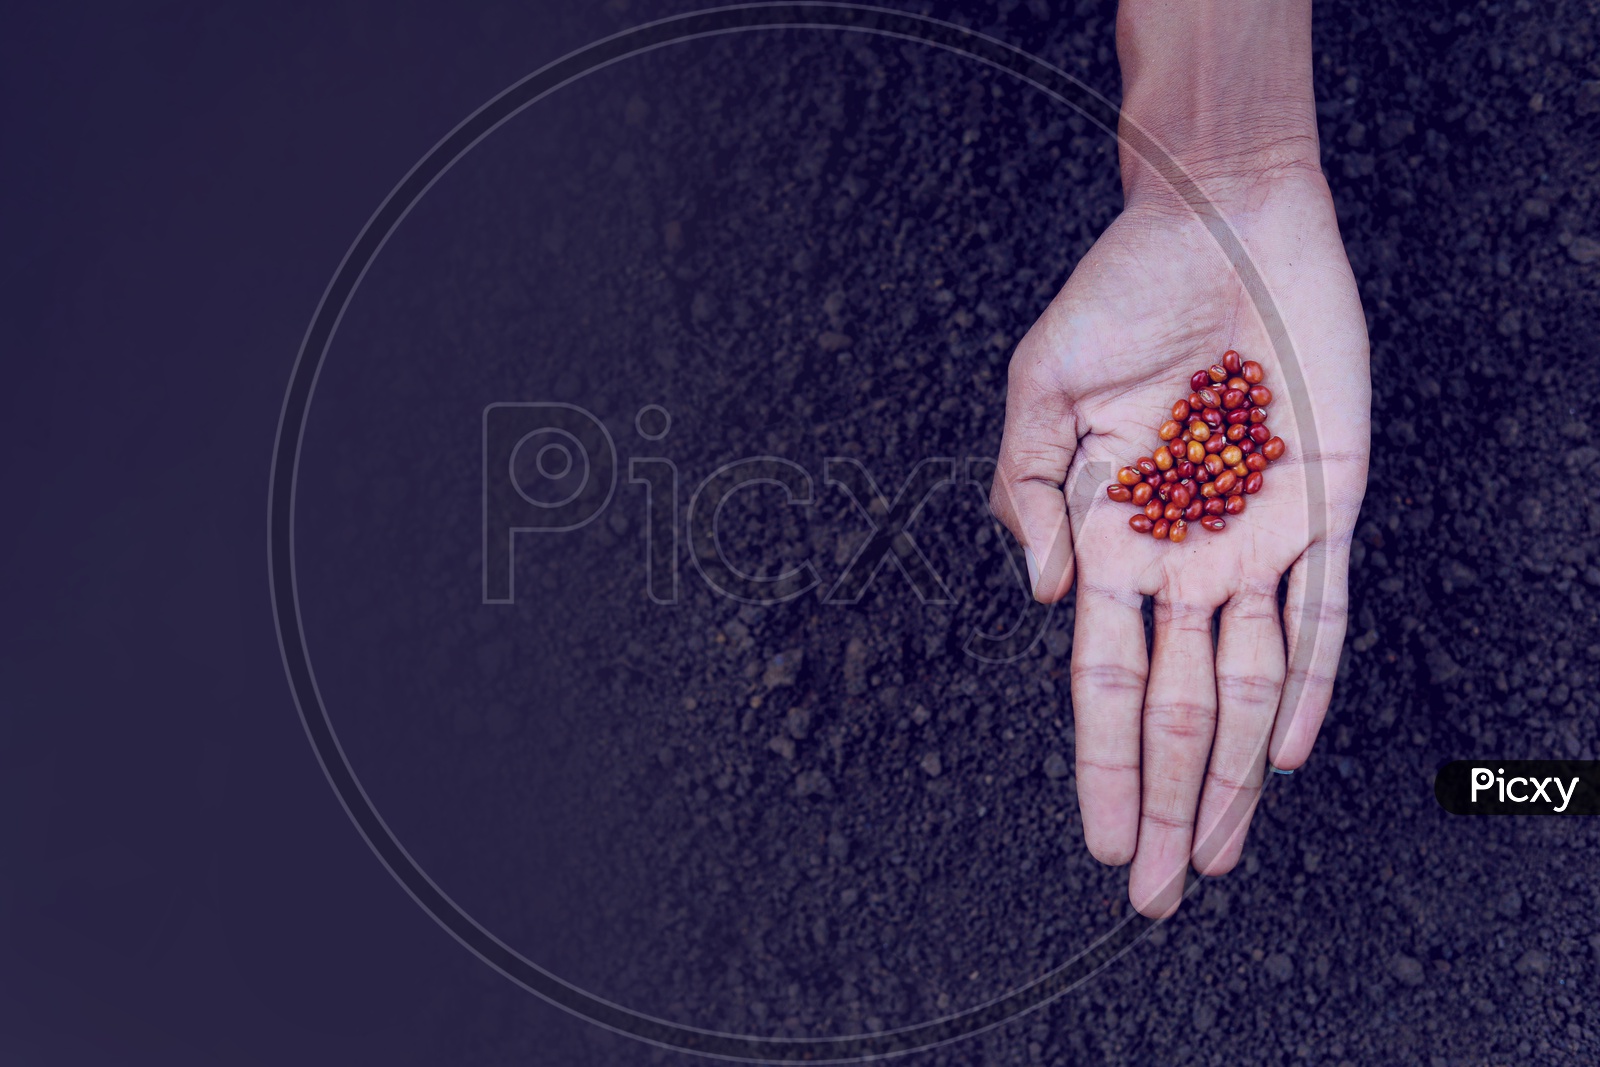 Pigeon pea  Seeds in a Farmers Hand For Seeding in Soil